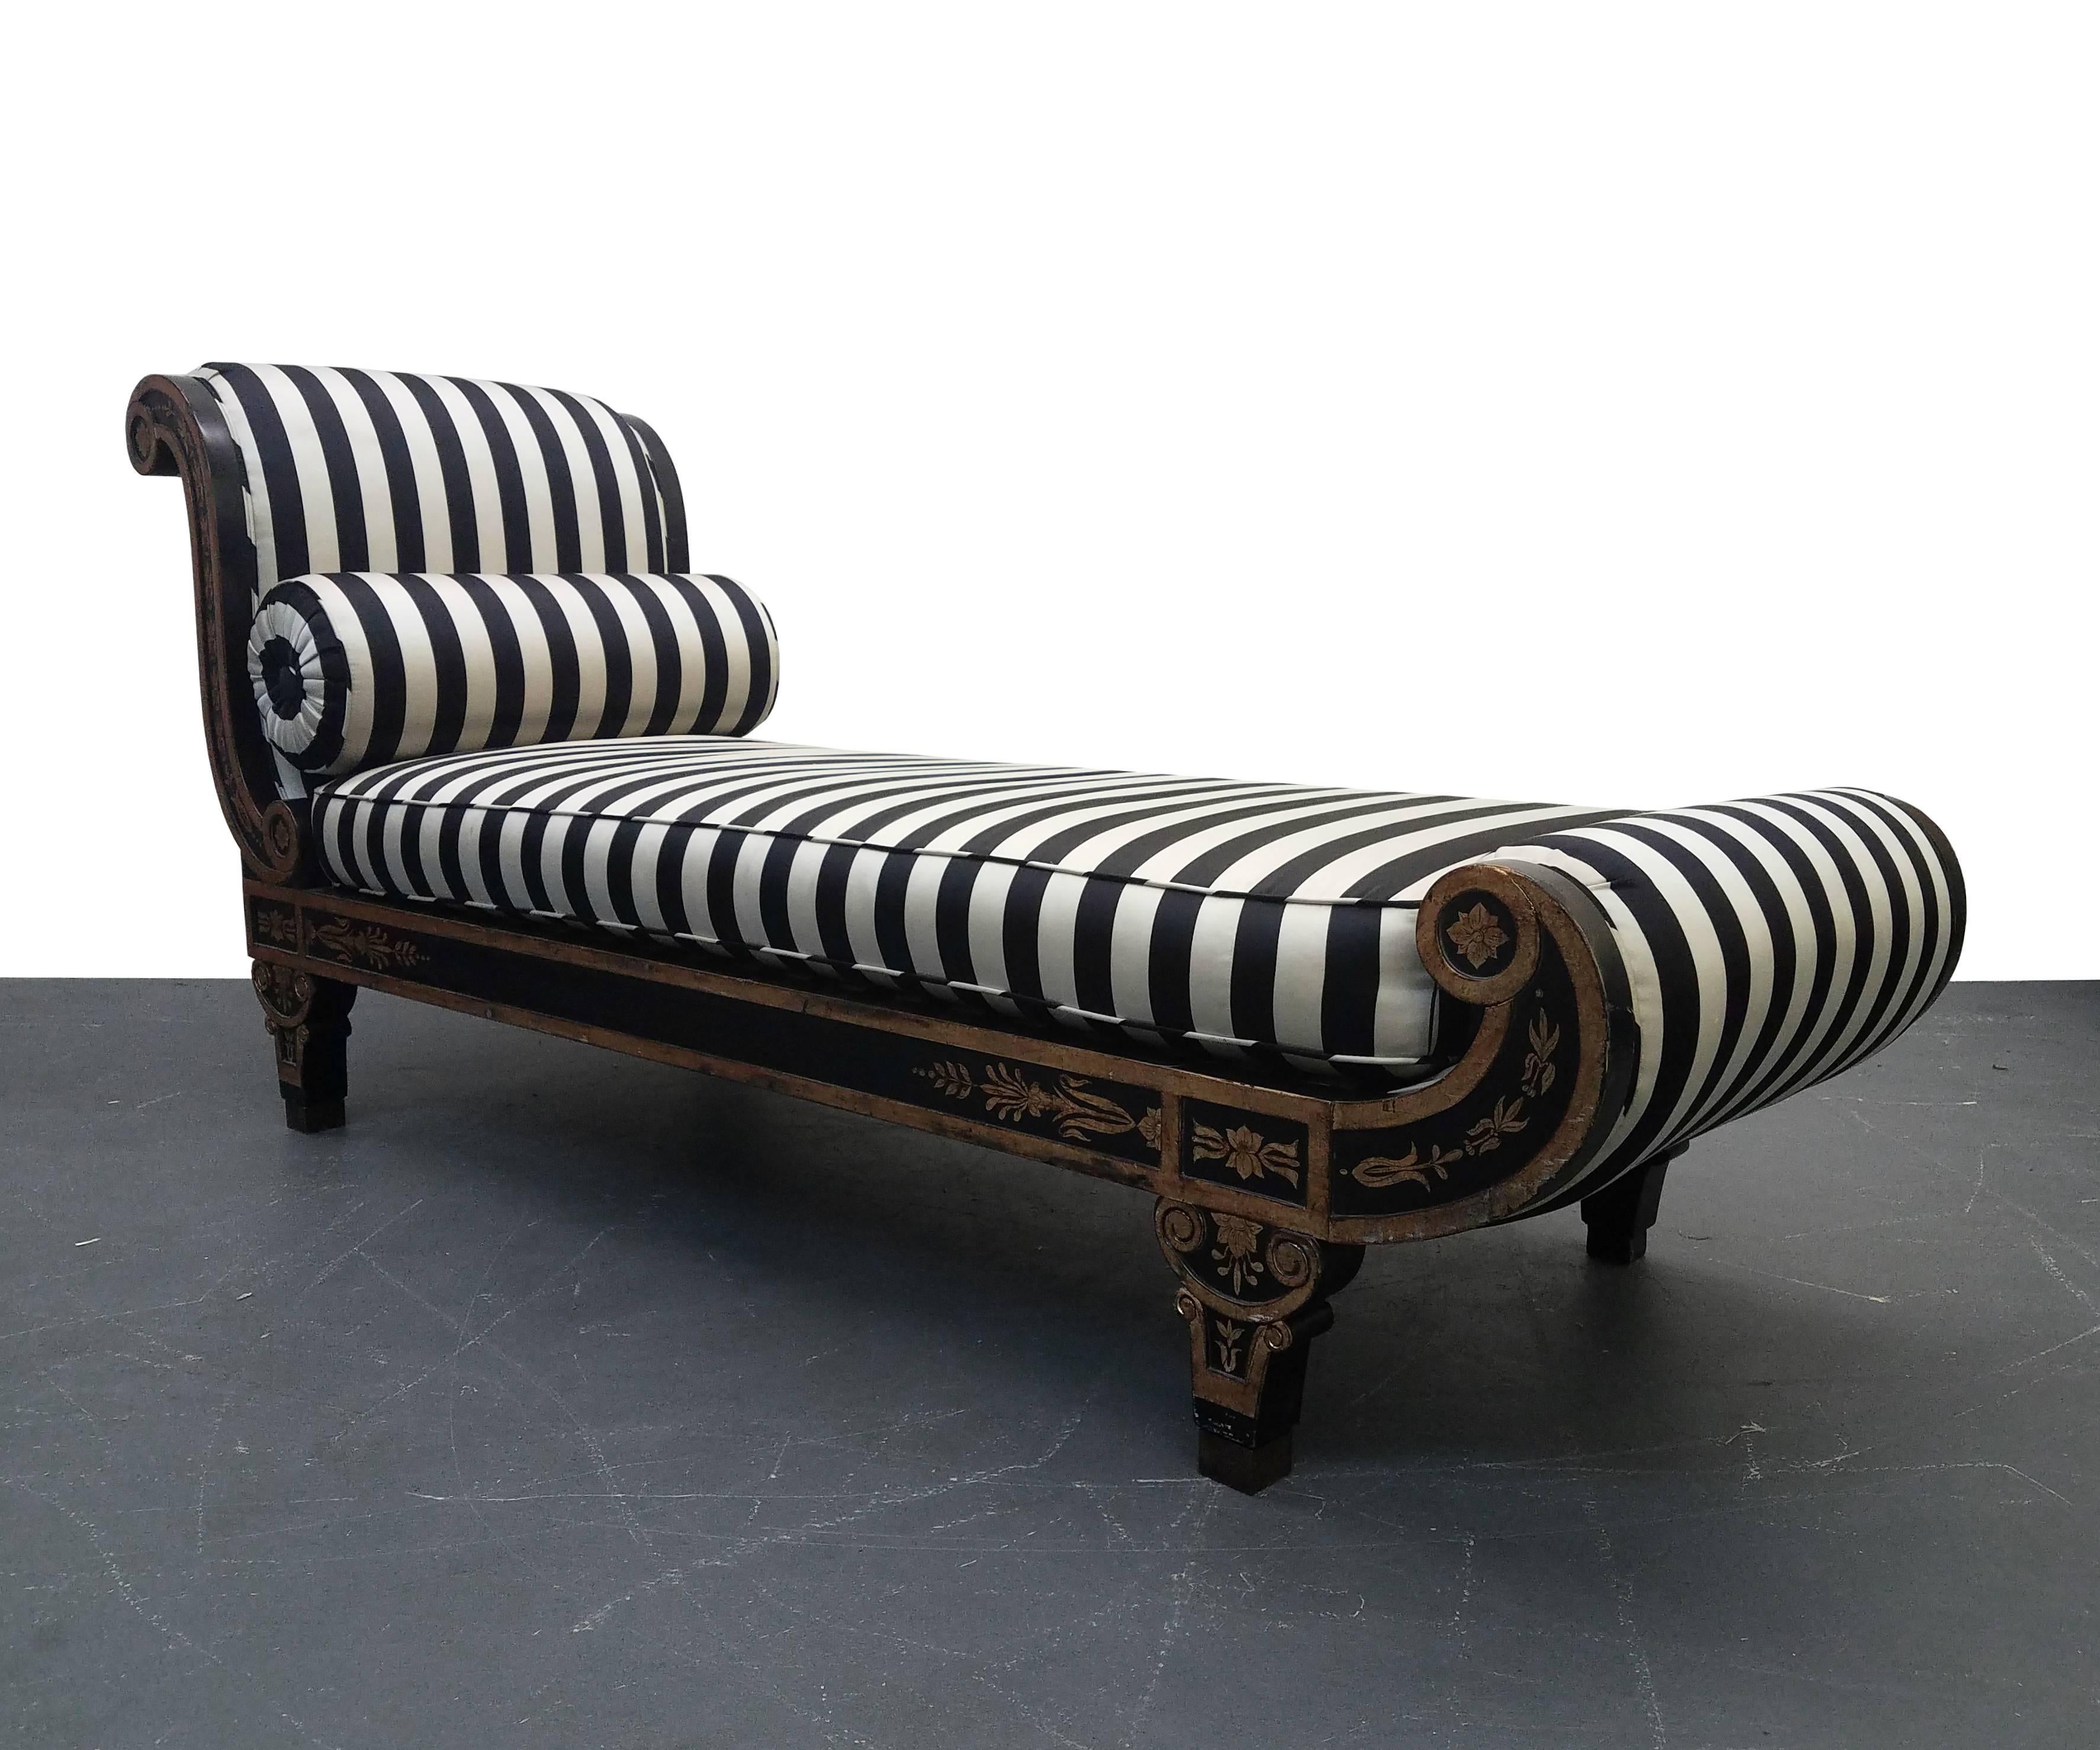 Regency style Cleopatra chaise longue chair. Framework is black with gold leaf detailing with black and white stripe sateen fabric.

This is a beautiful piece, a real standout. The perfect piece for your boudoir or Regency inspired space. Would